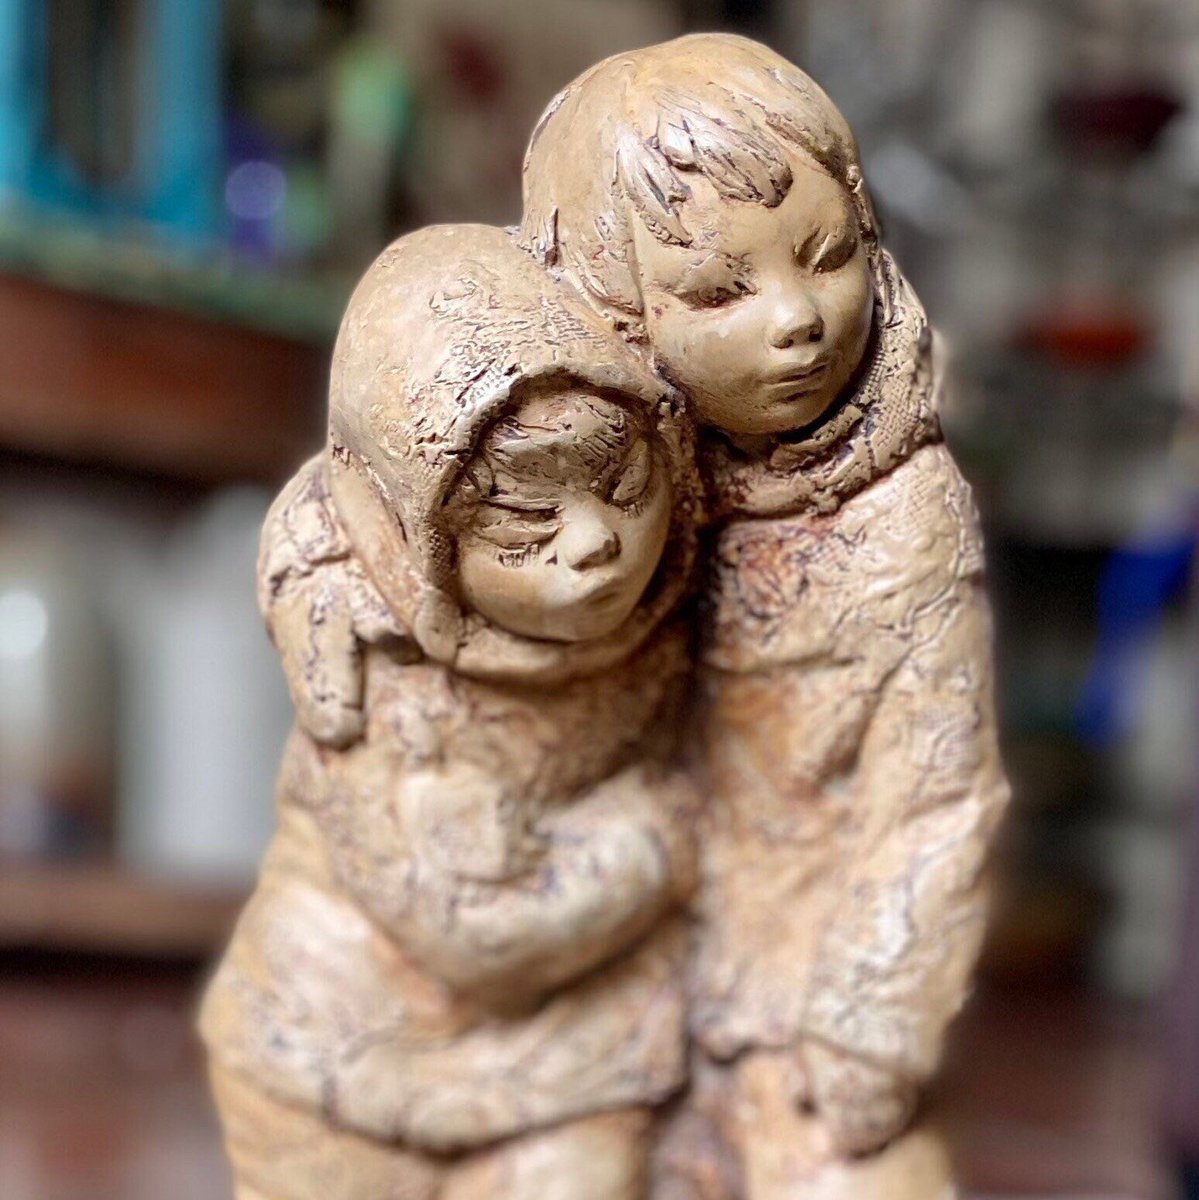 Inuit Boy and Girl Large sculpted Figure after Lladro. Illegibly signed 1973 etsy.me/3WZyIdz
#inuitstatue #handcarvedstatue #vintageart #collectiblestatues #collectibleart